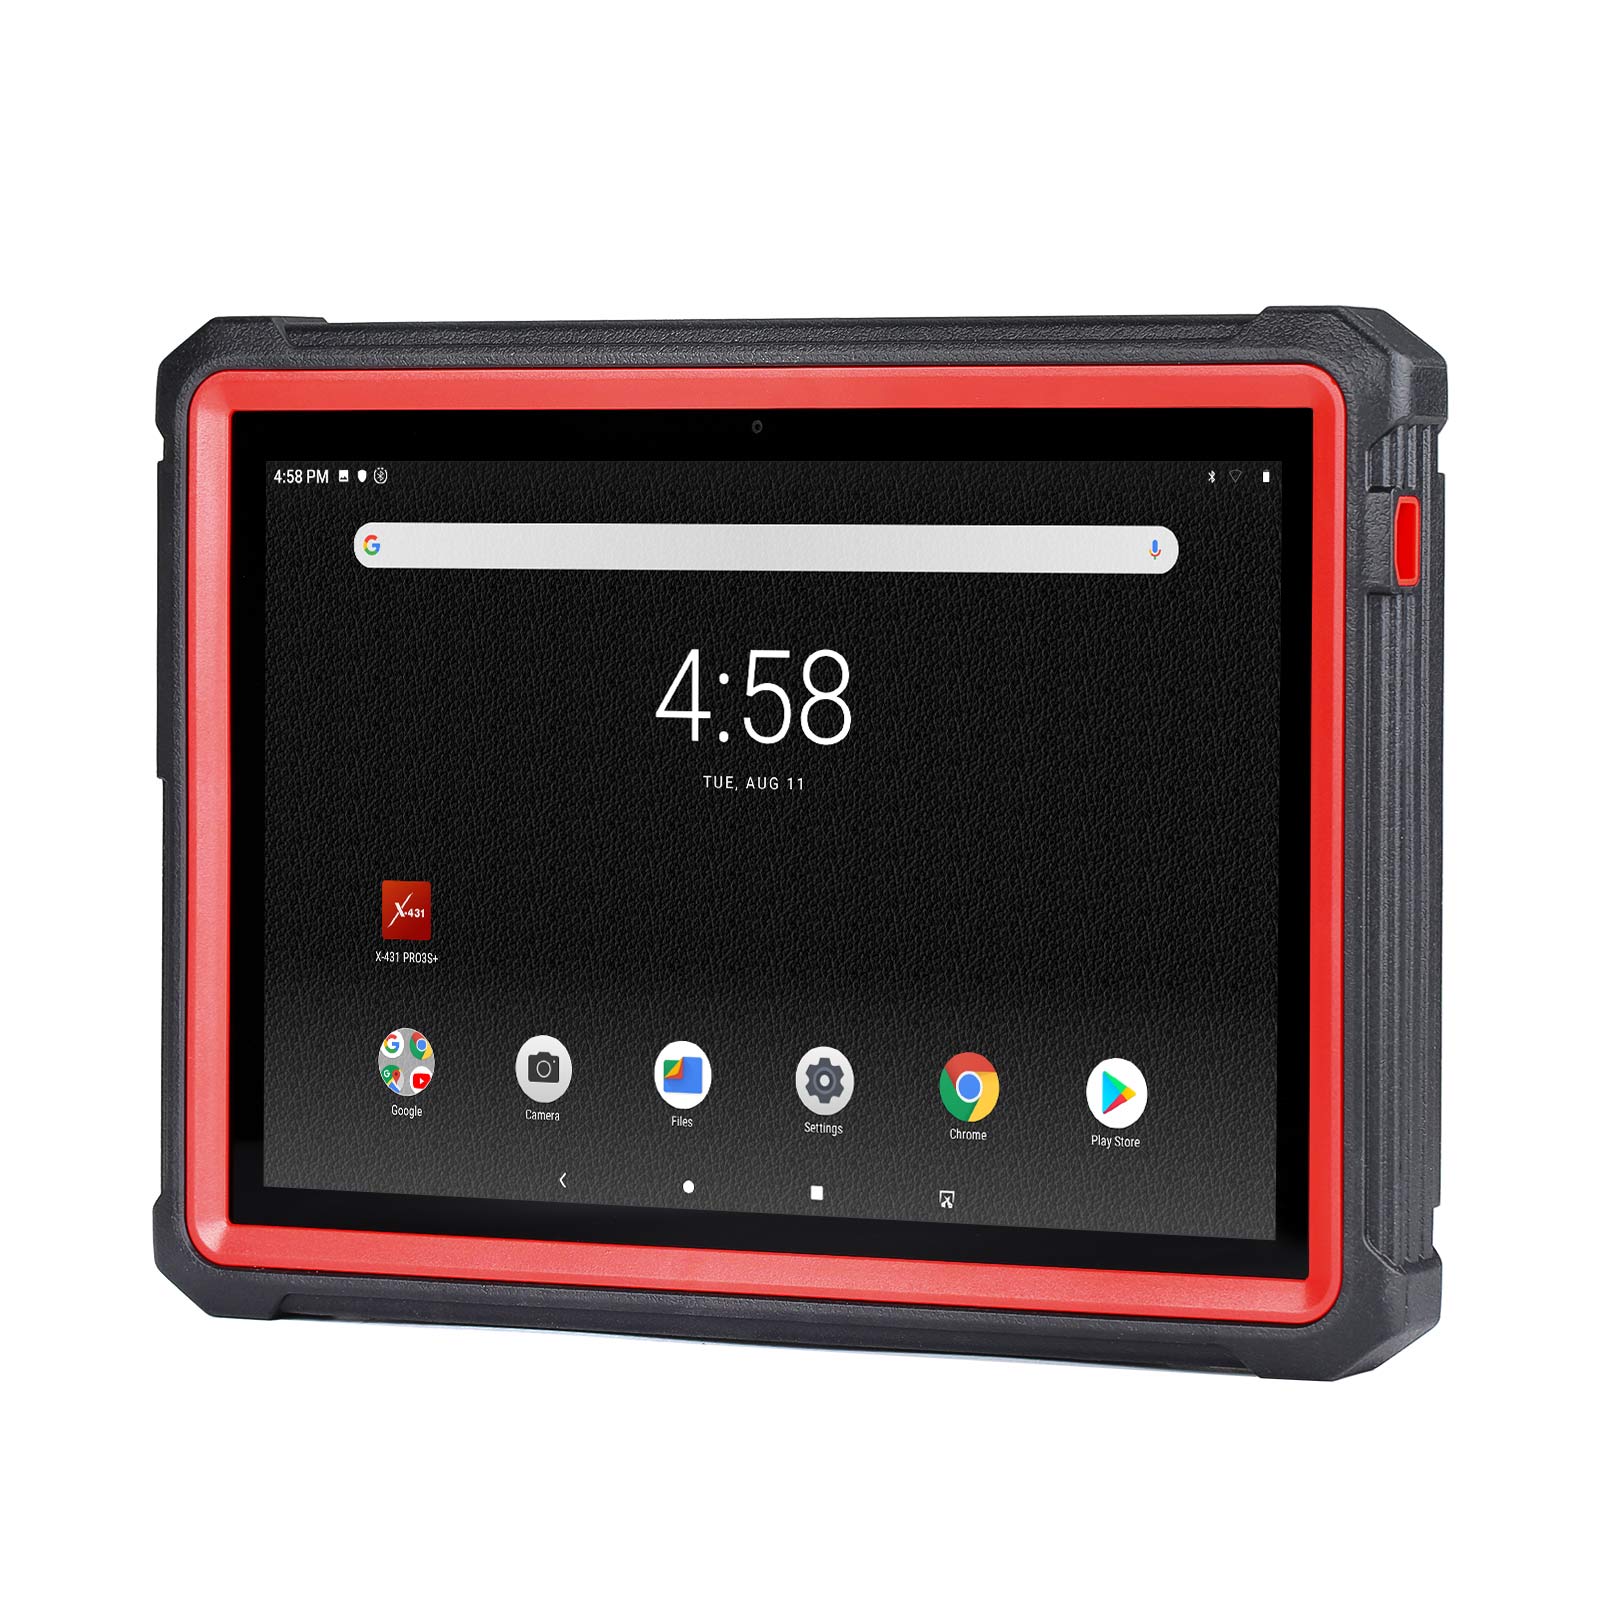 2023 Launch X431 V + V Plus 10 Inch Bt Screen Scanner Launch X431 PRO V  Global Version Latest Launch X431 PRO3 - China Auto Diagnostic Tool Launch  X431 PRO3, 431 PRO